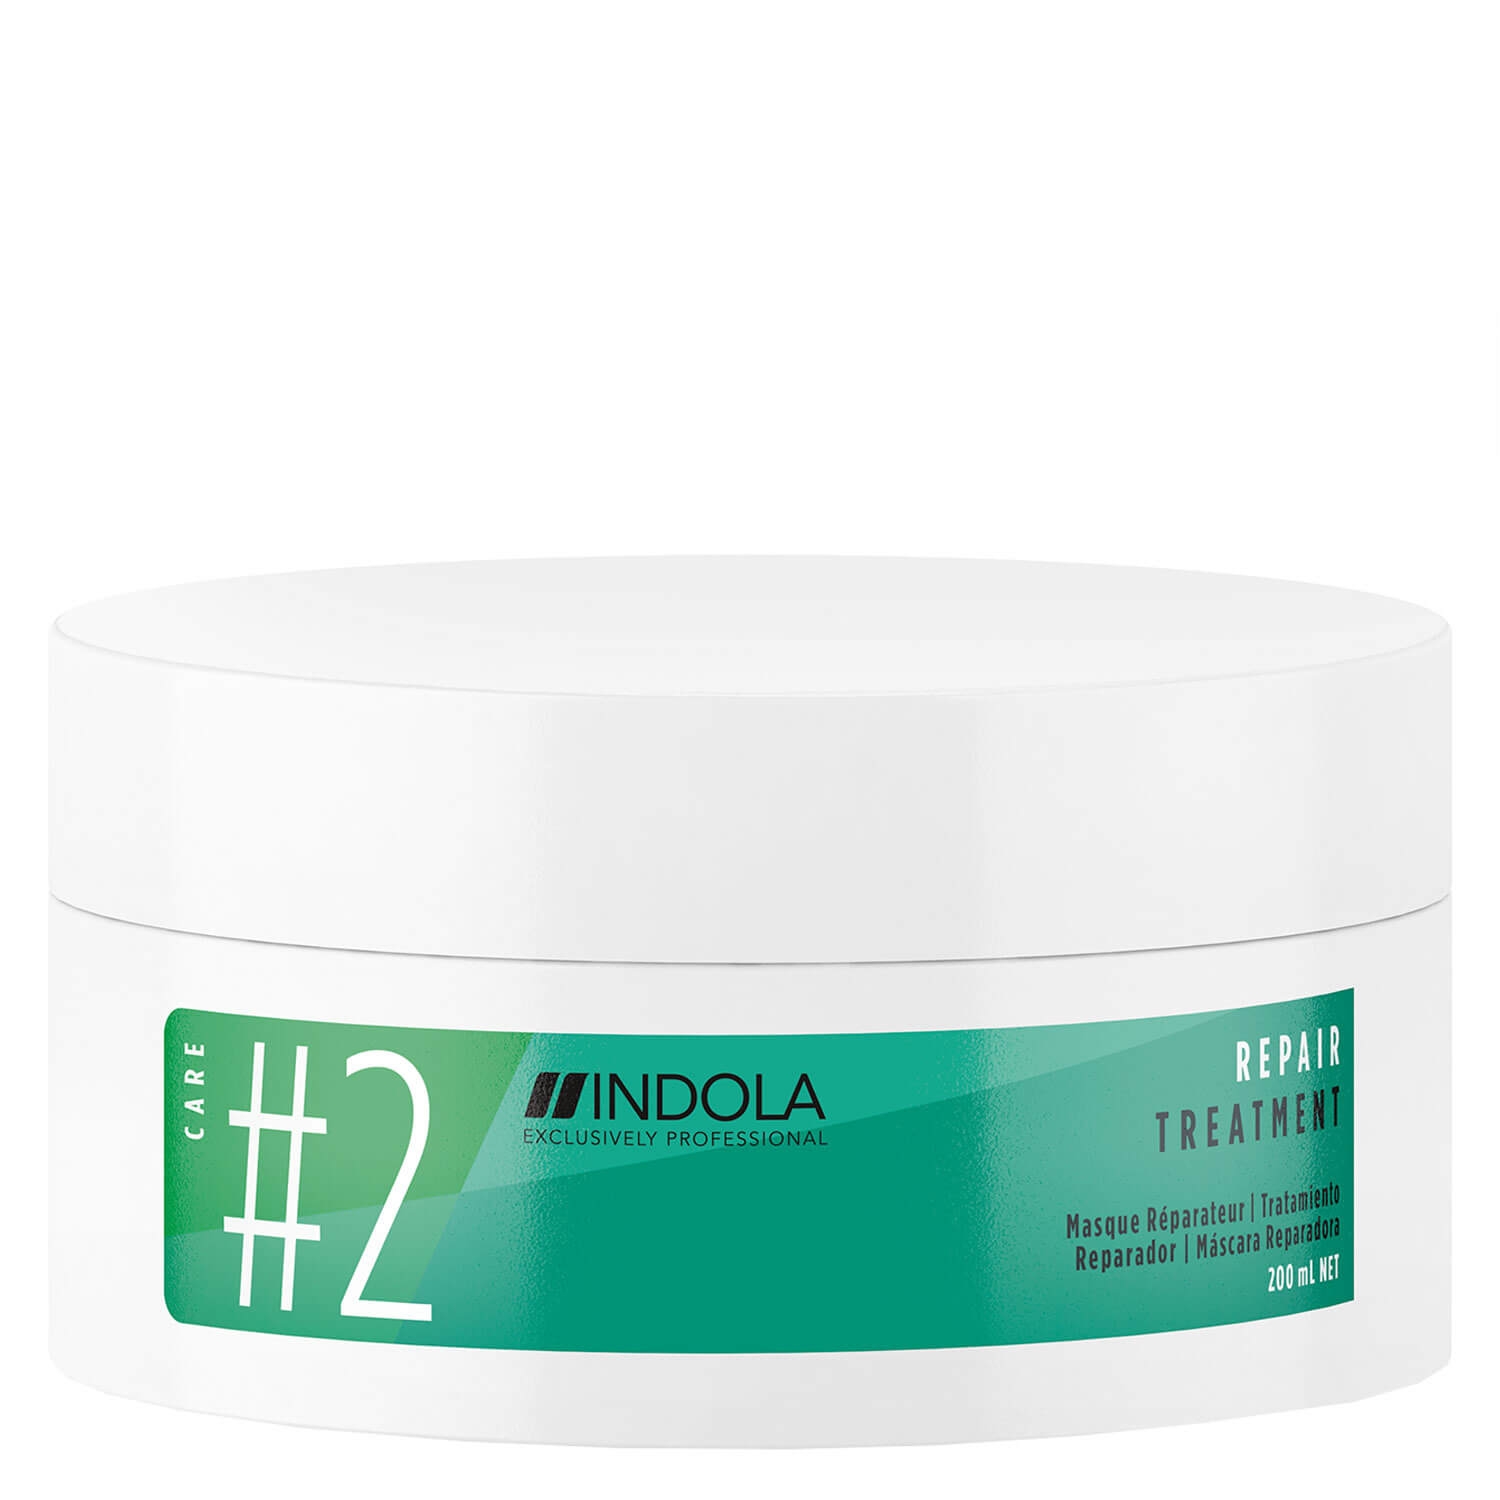 Product image from Indola #Care - Repair Treatment